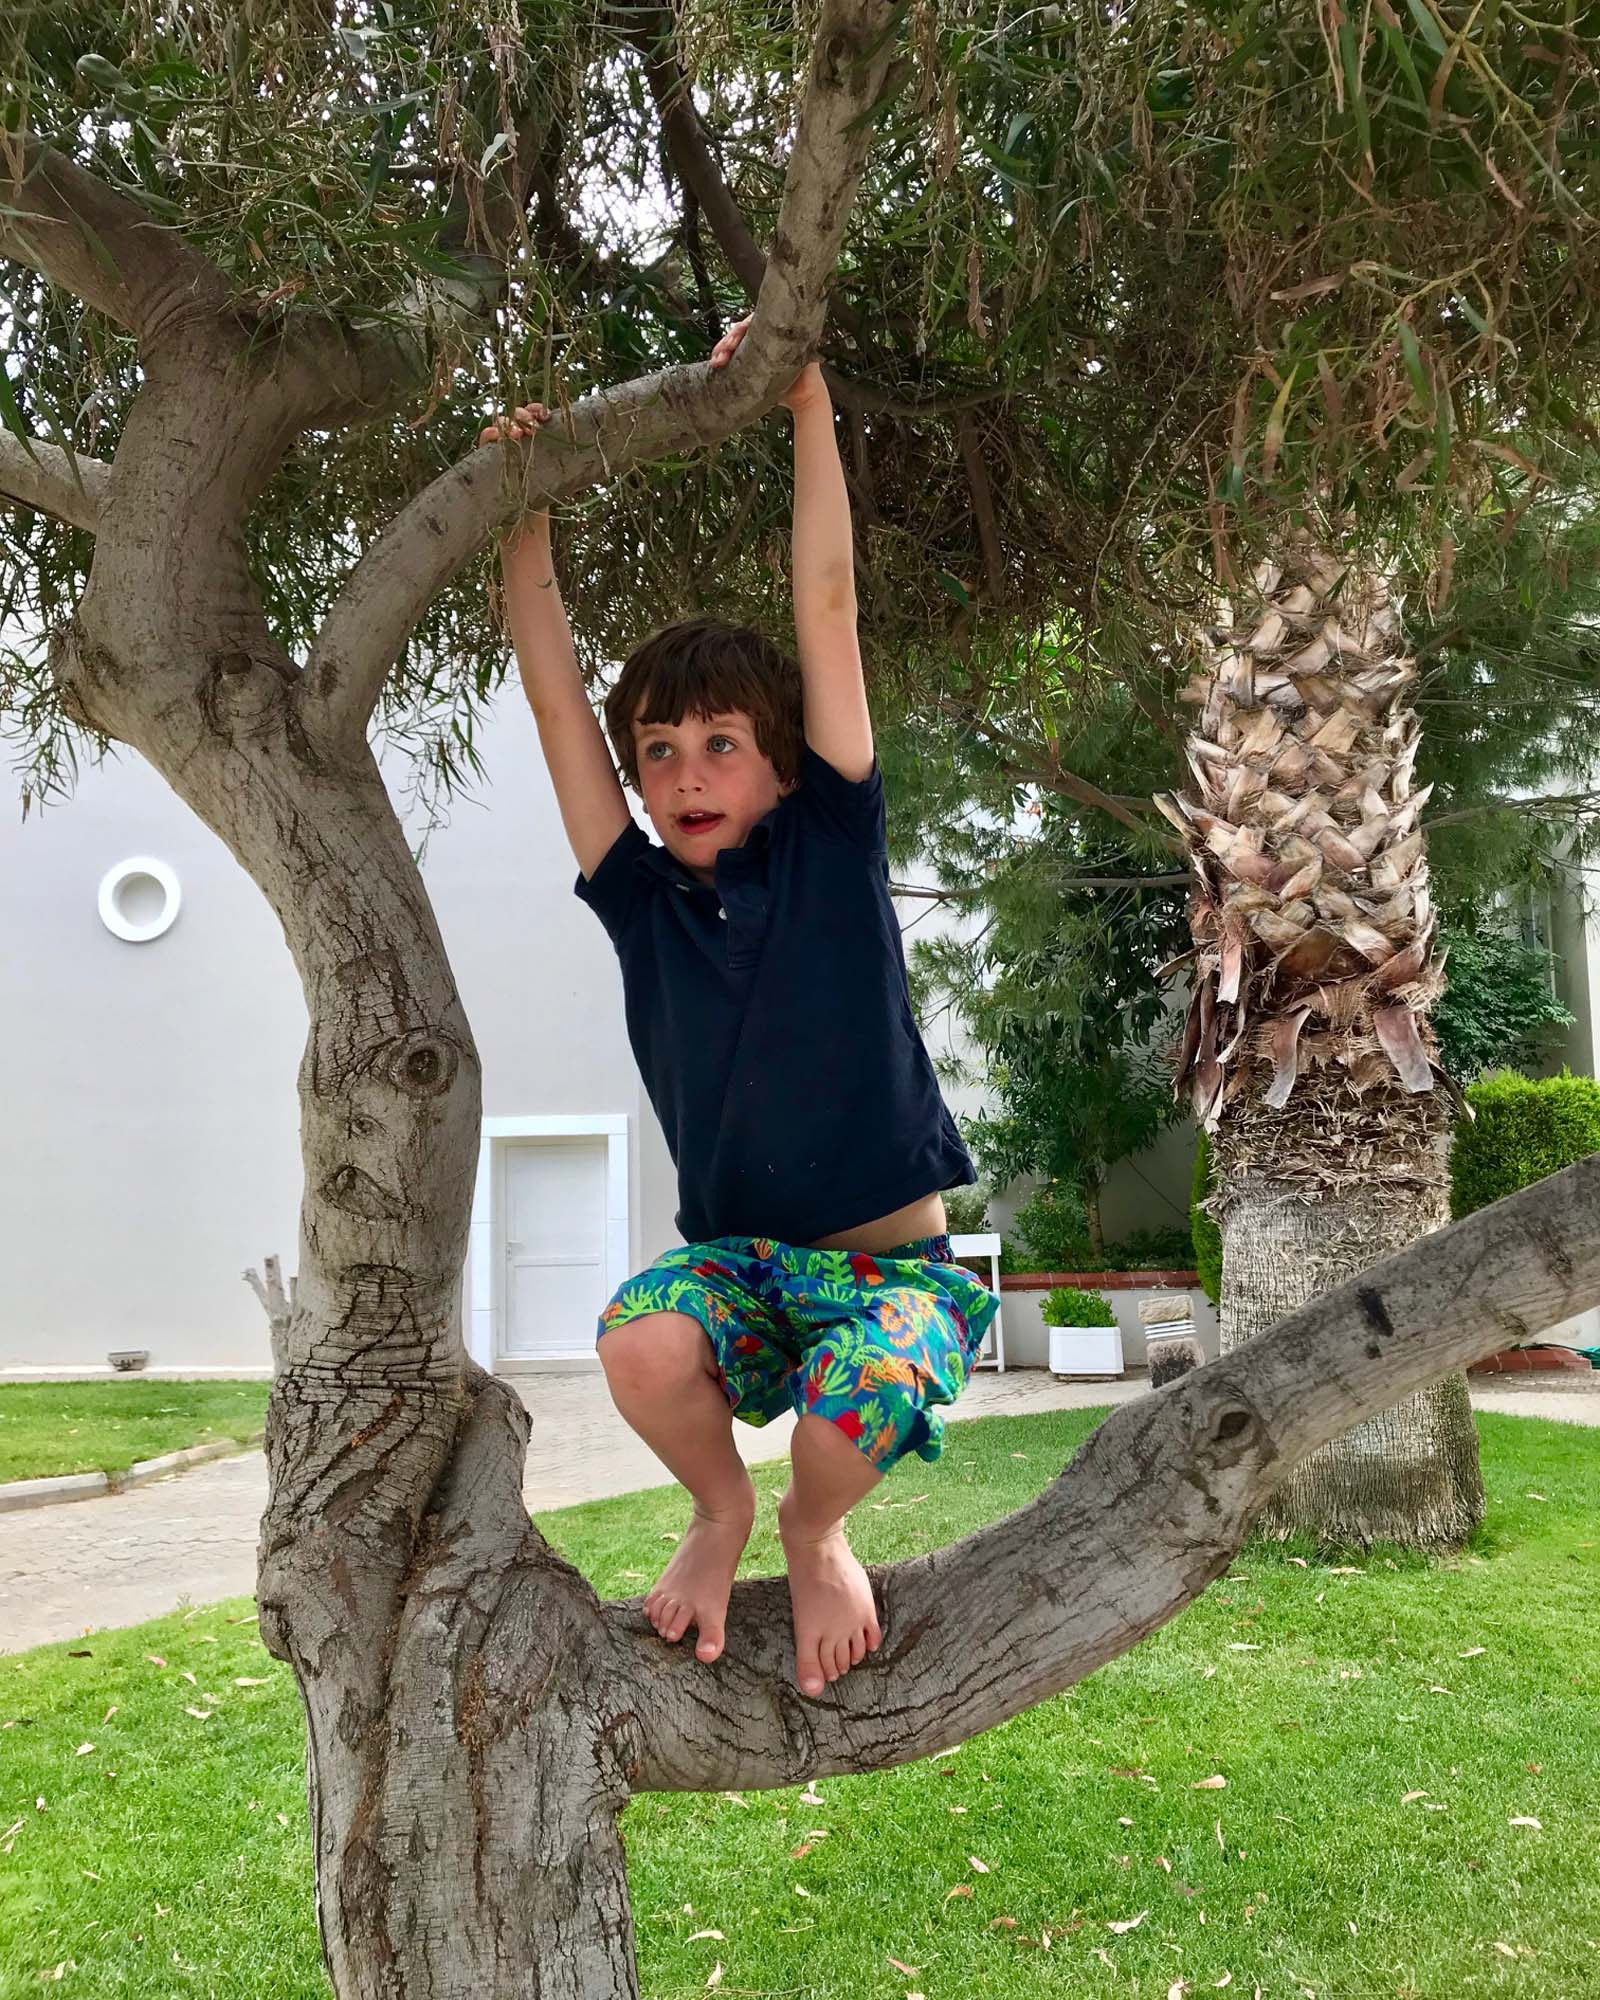 Zac up one of the many trees in the Phokaia resort. Yes that's chocolate round his mouth